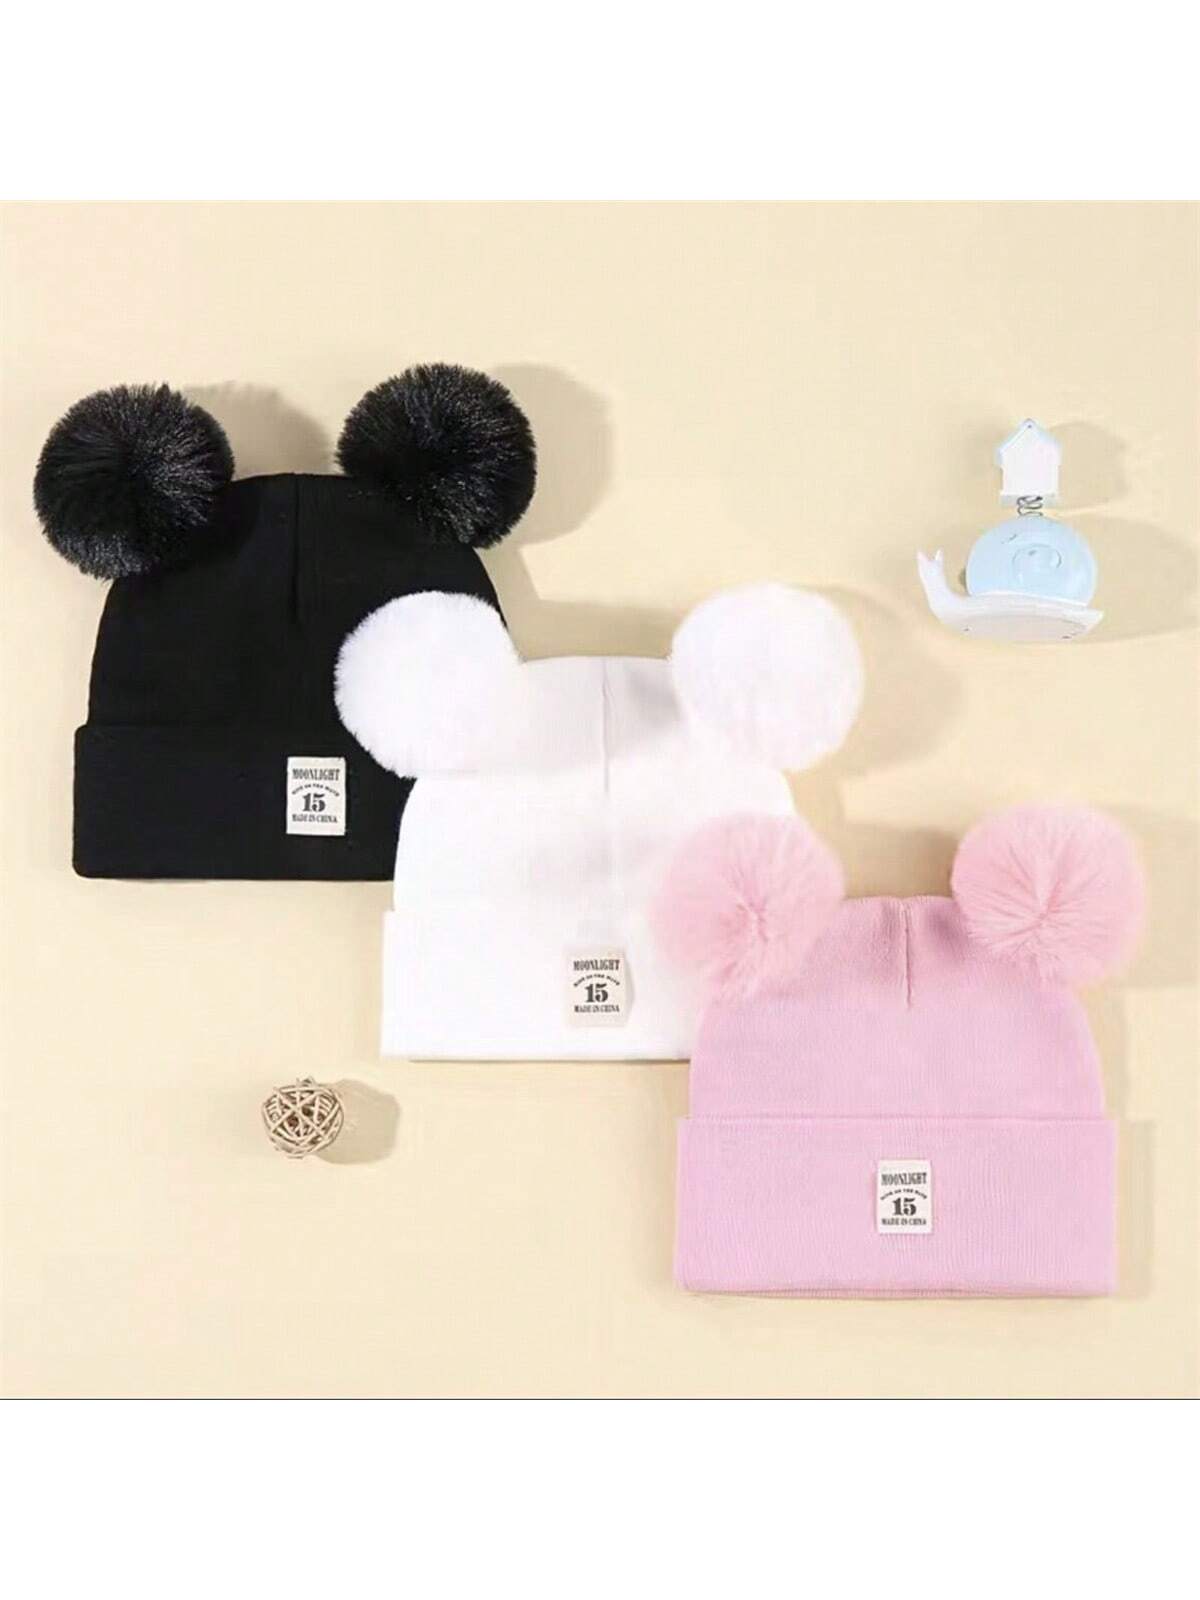 2pcs Double Ball Cart Label Children's Knitted Hat Combination Suitable For Winter Warm Keeping Winter Hat For Baby twins